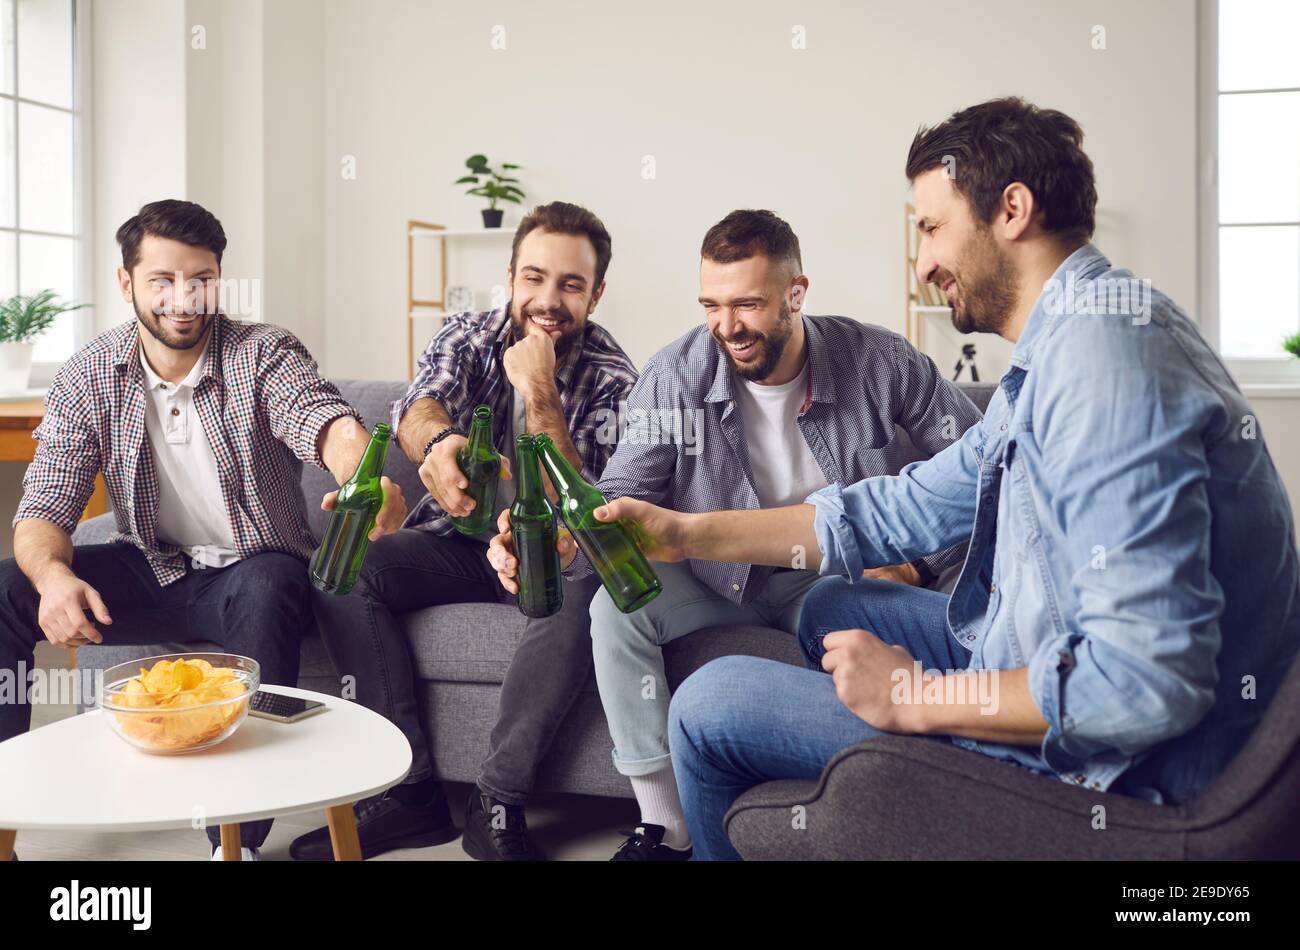 Group of friends sitting on couch, laughing and clinking beers after funny toast Stock Photo